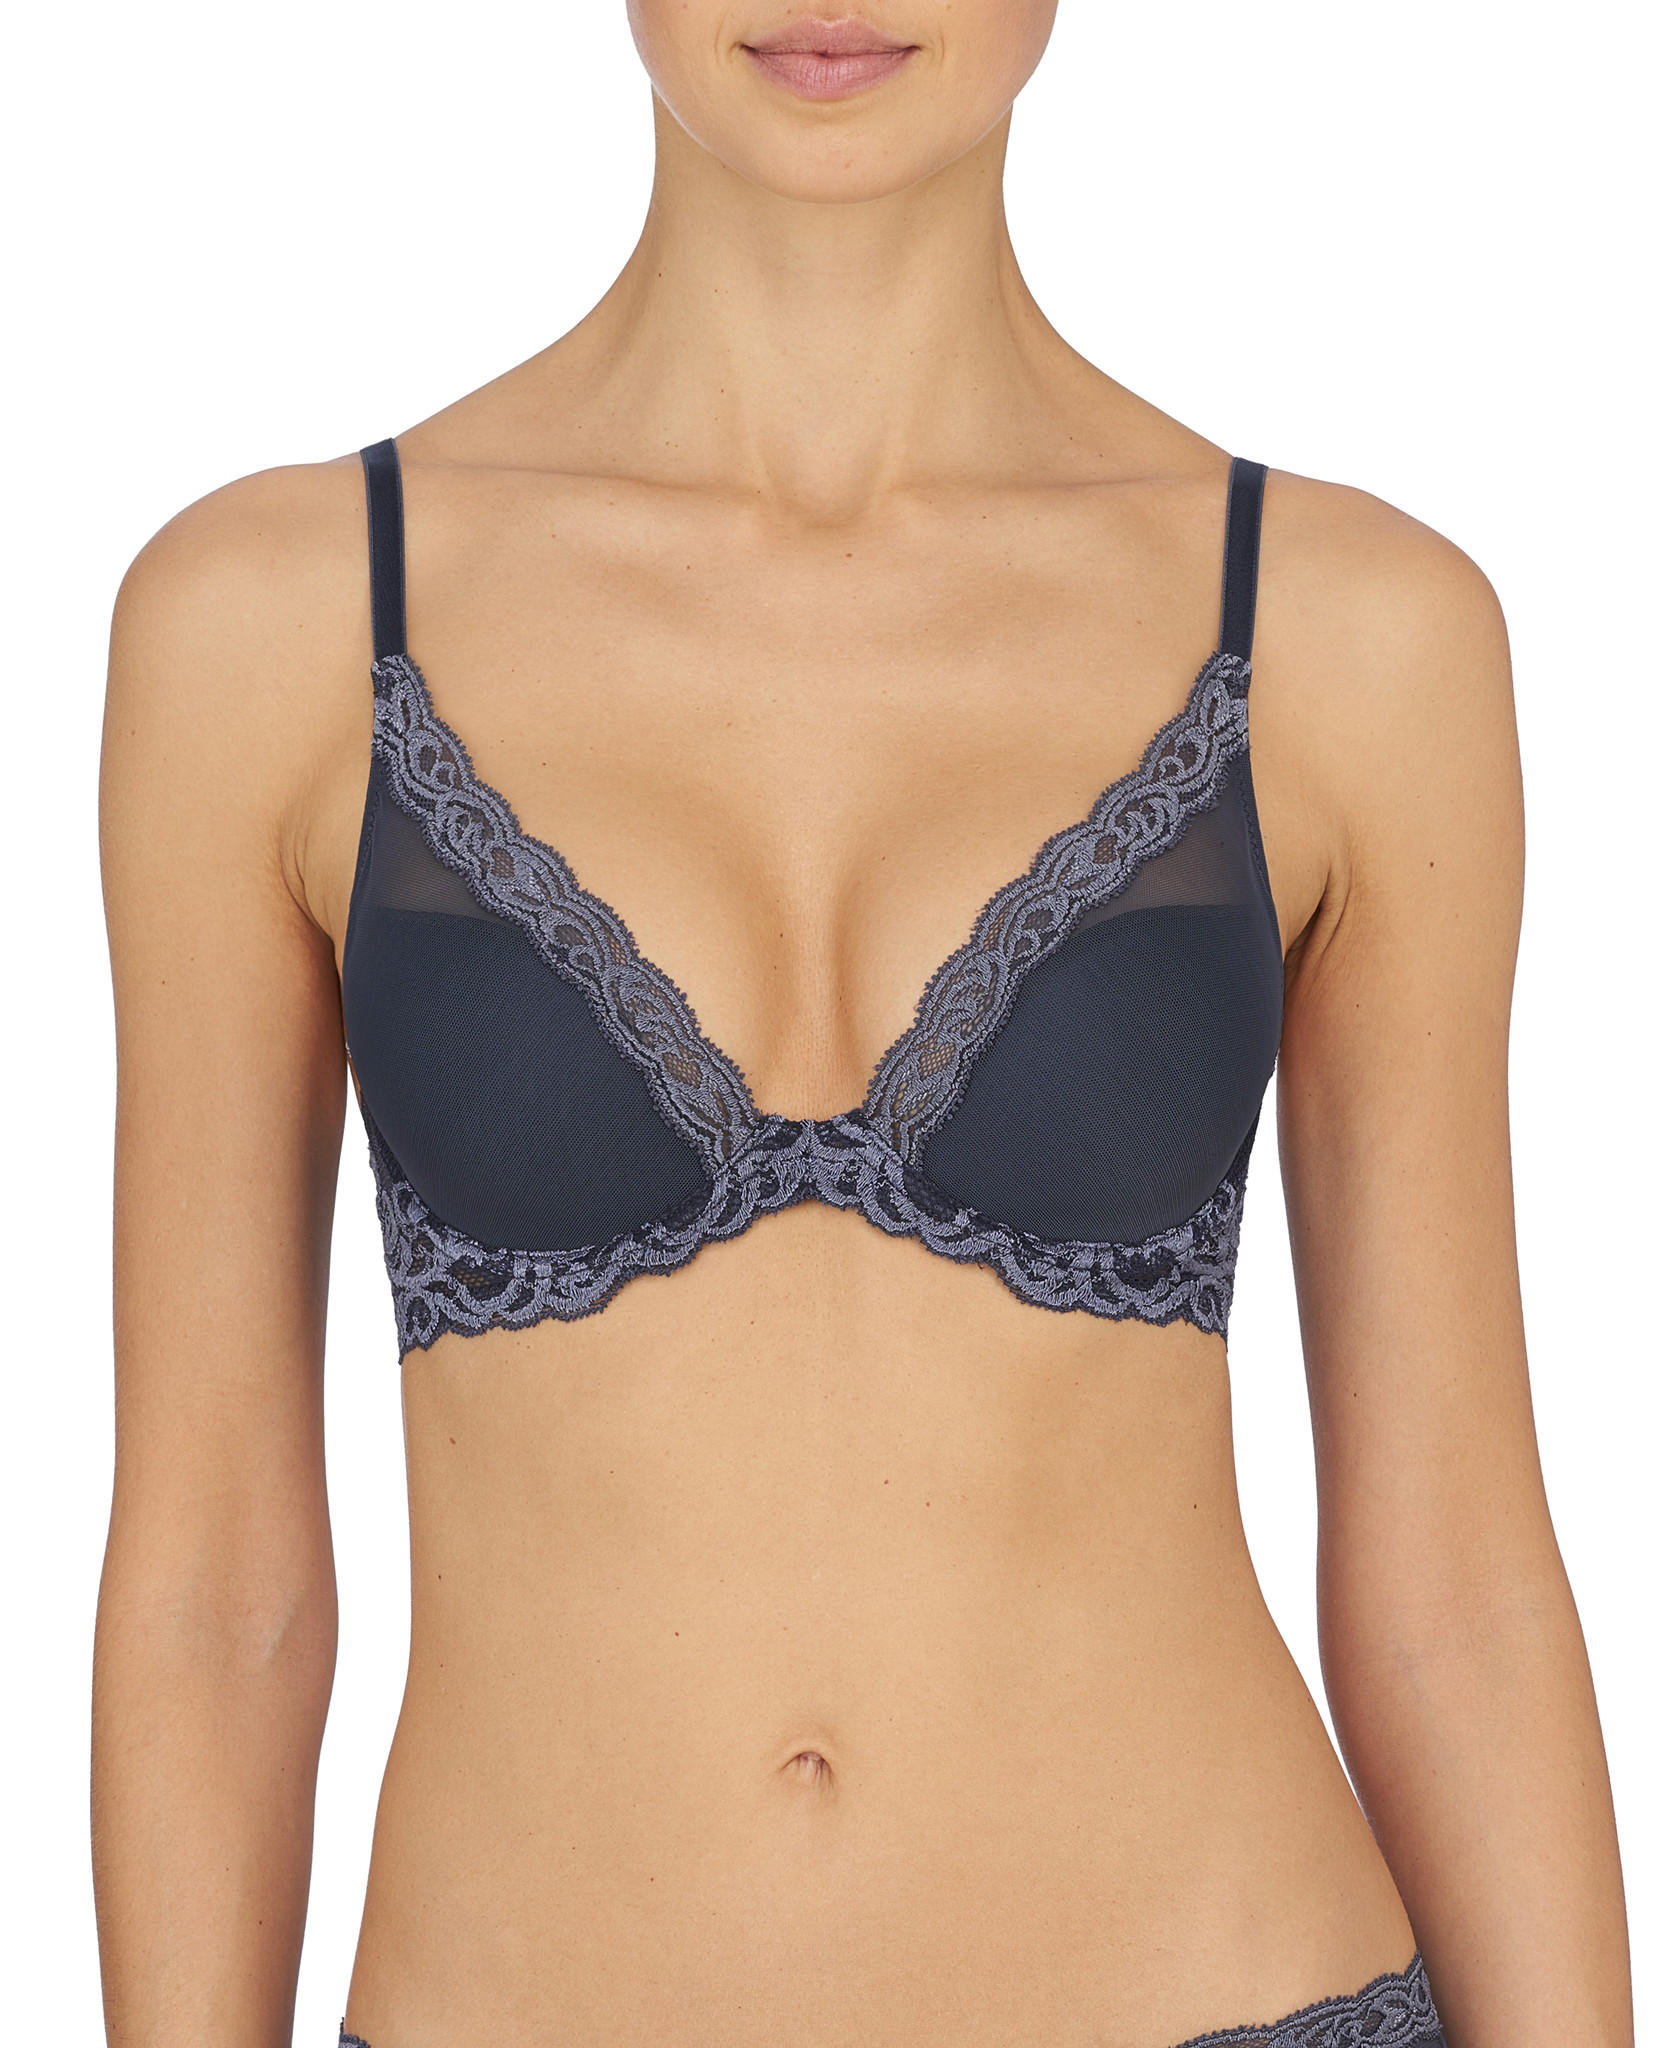 Natori Feathers Lace Trimmed Underwire Bra - Ash Navy